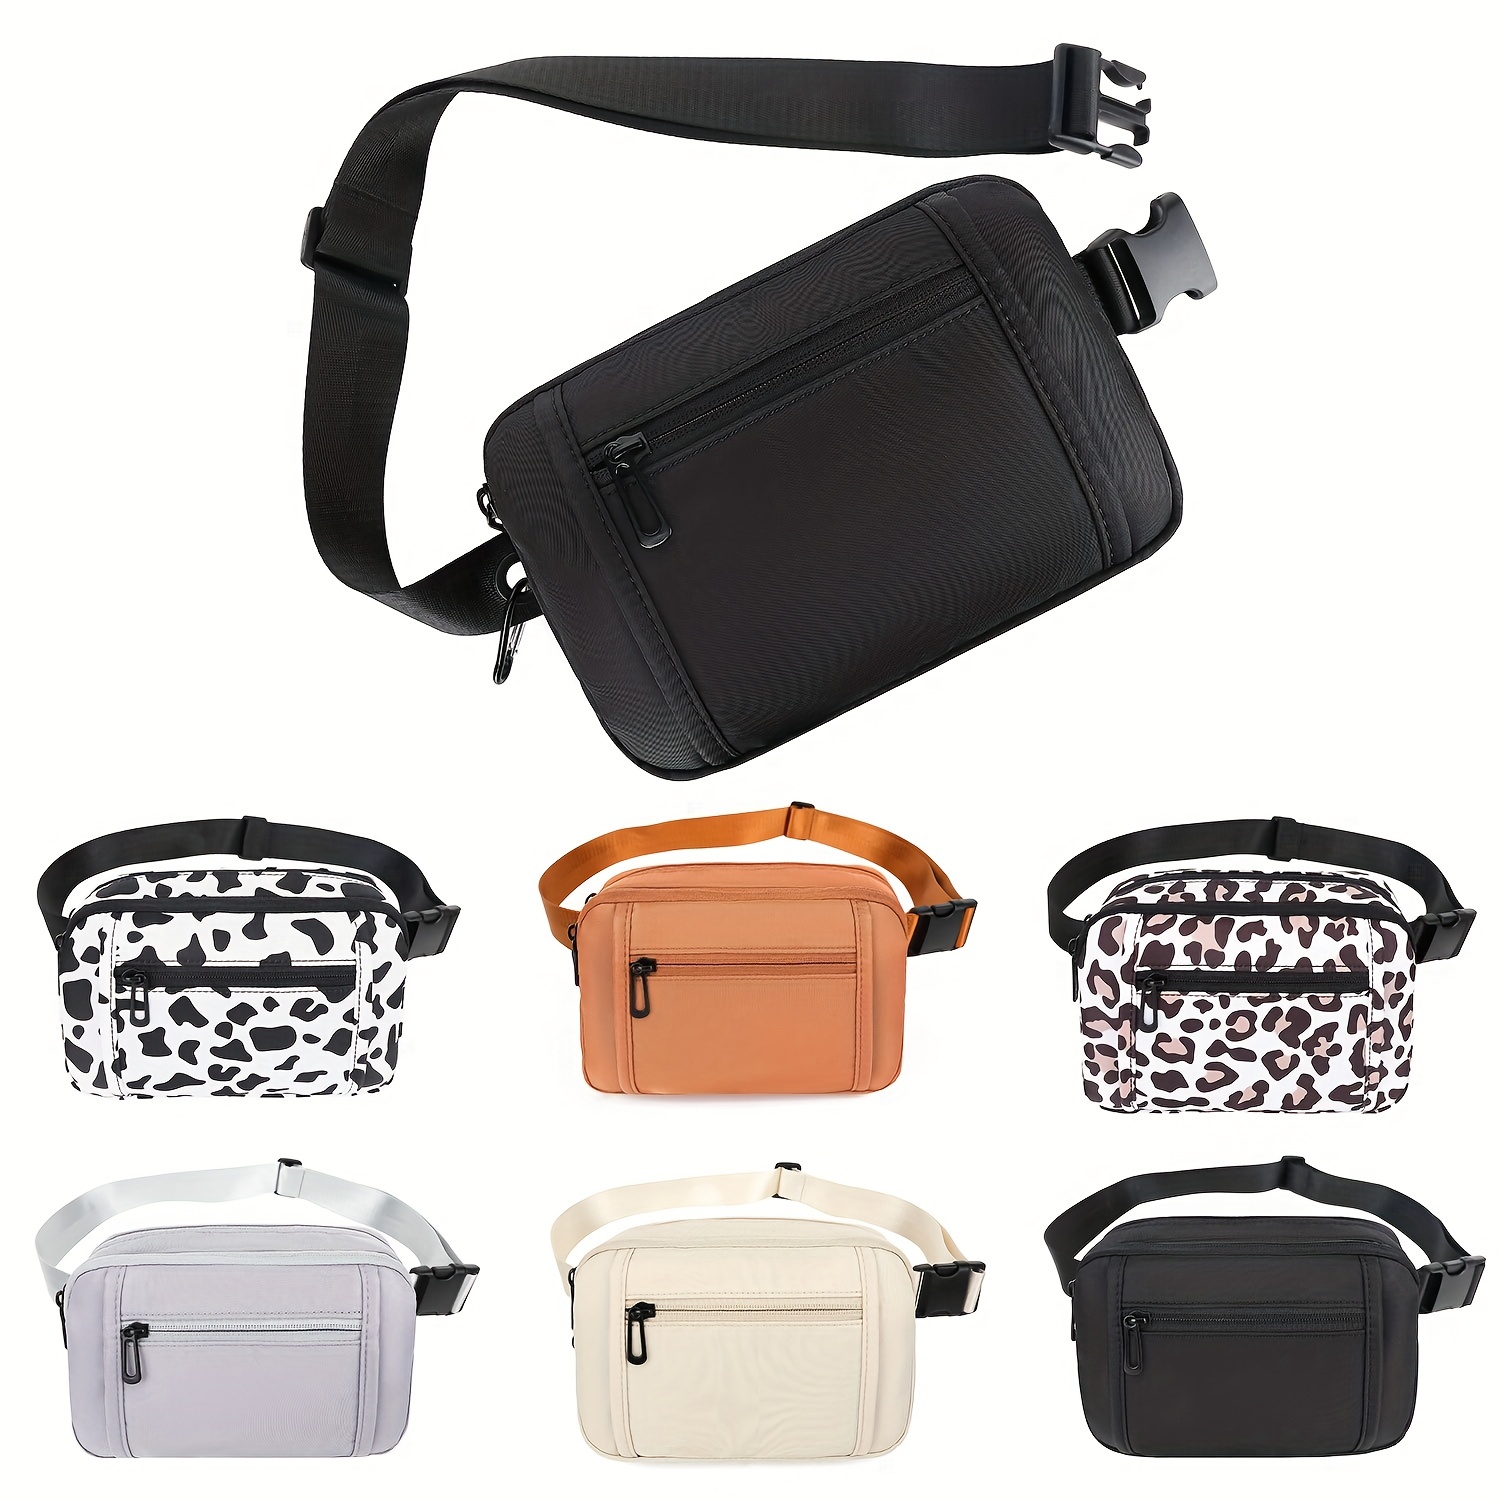 Amosfun Fanny Pack Purse Bags for Storage Clothes Bags for Storage  Crossbody Bag Outdoor Waist Pack Practical Waist Bag Mini Messenger Bag  Mobile